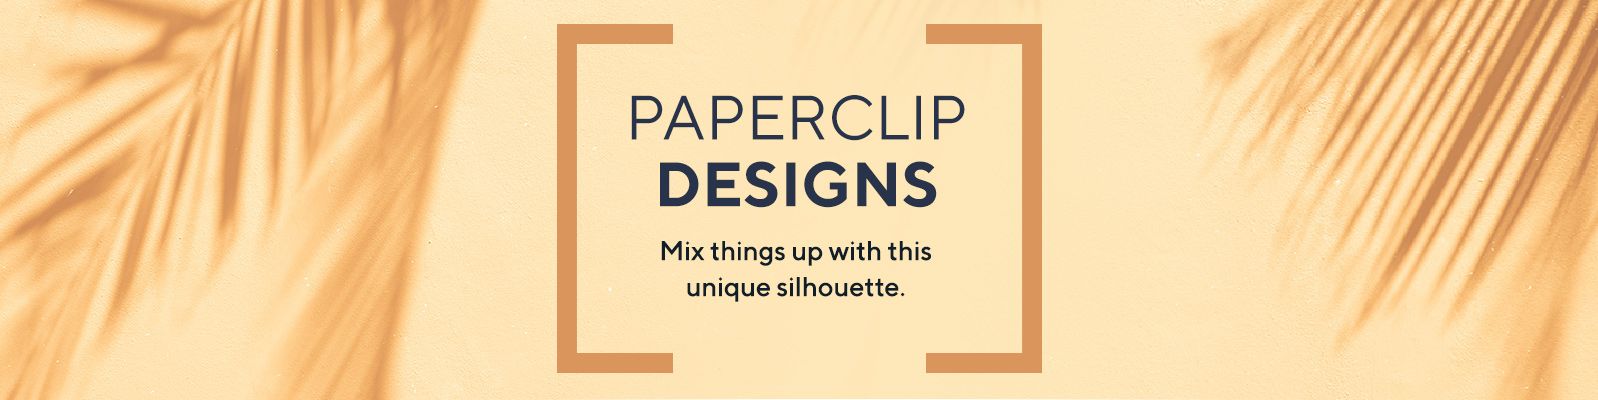 Paperclip Designs.  Mix things up with this unique silhouette.